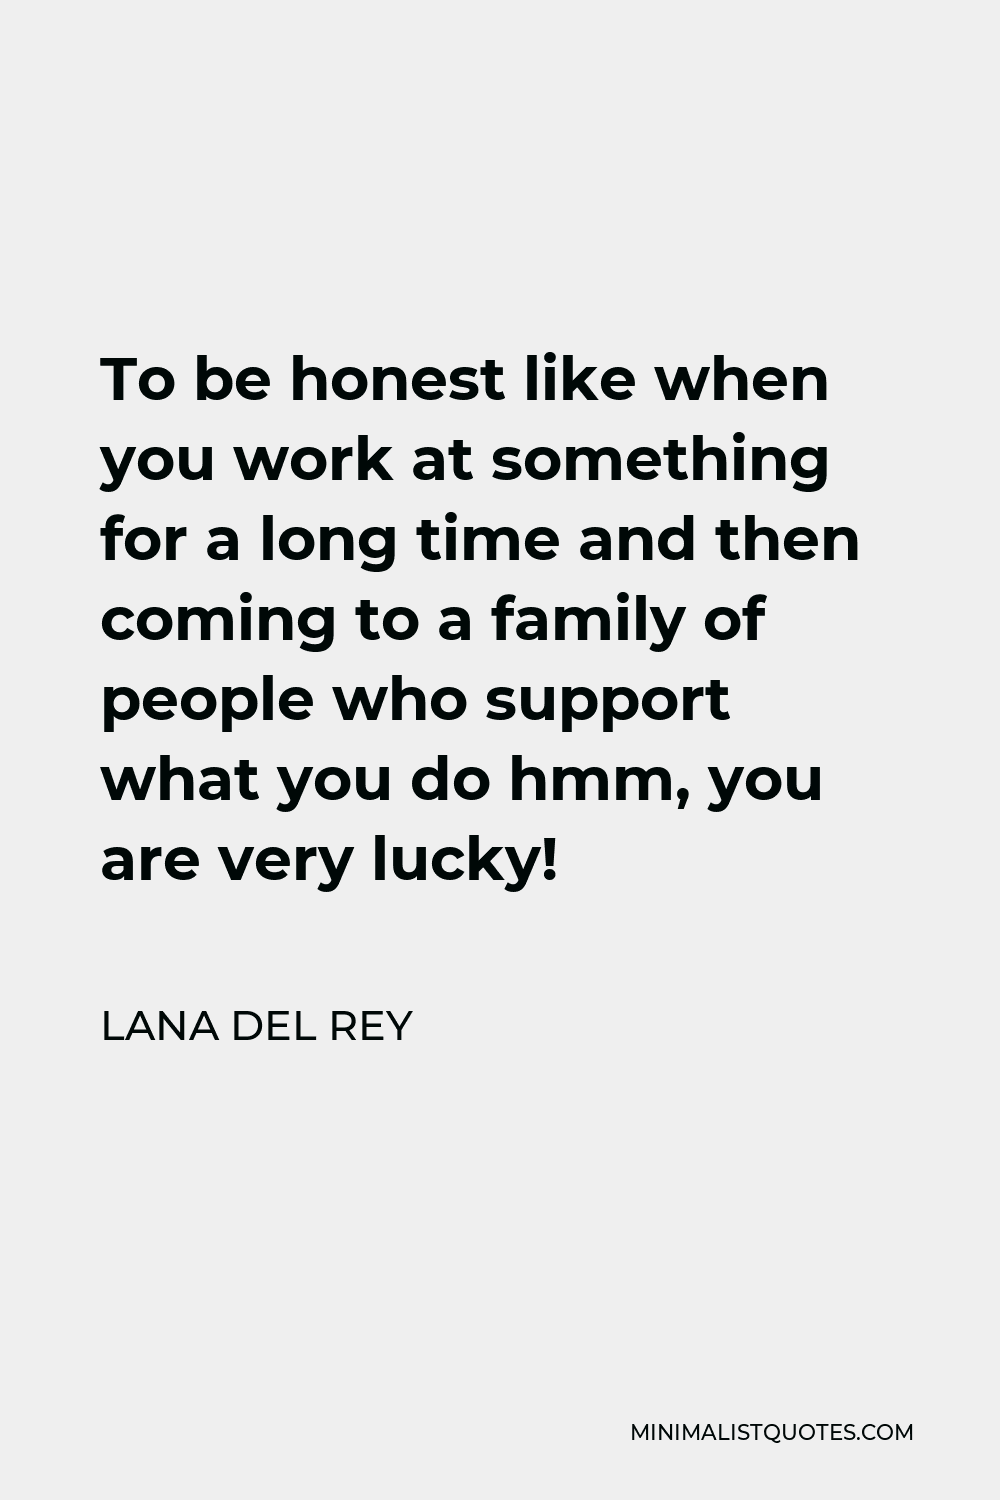 Lana Del Rey Quote - To be honest like when you work at something for a long time and then coming to a family of people who support what you do hmm, you are very lucky!